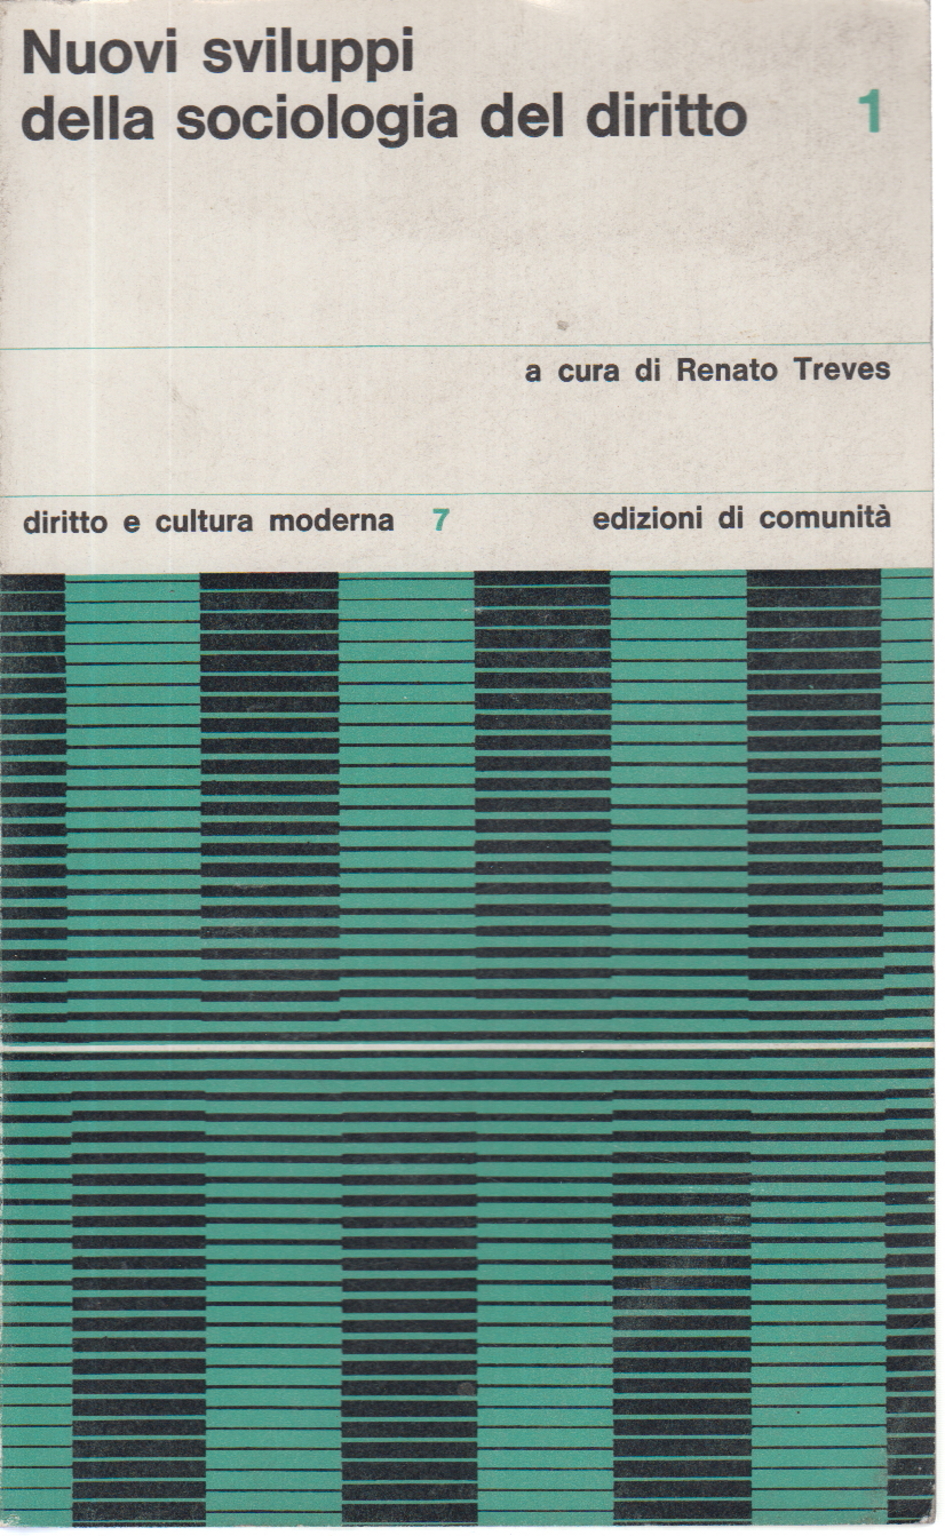 The new developments in the sociology in law, (1966-, Renato Treves